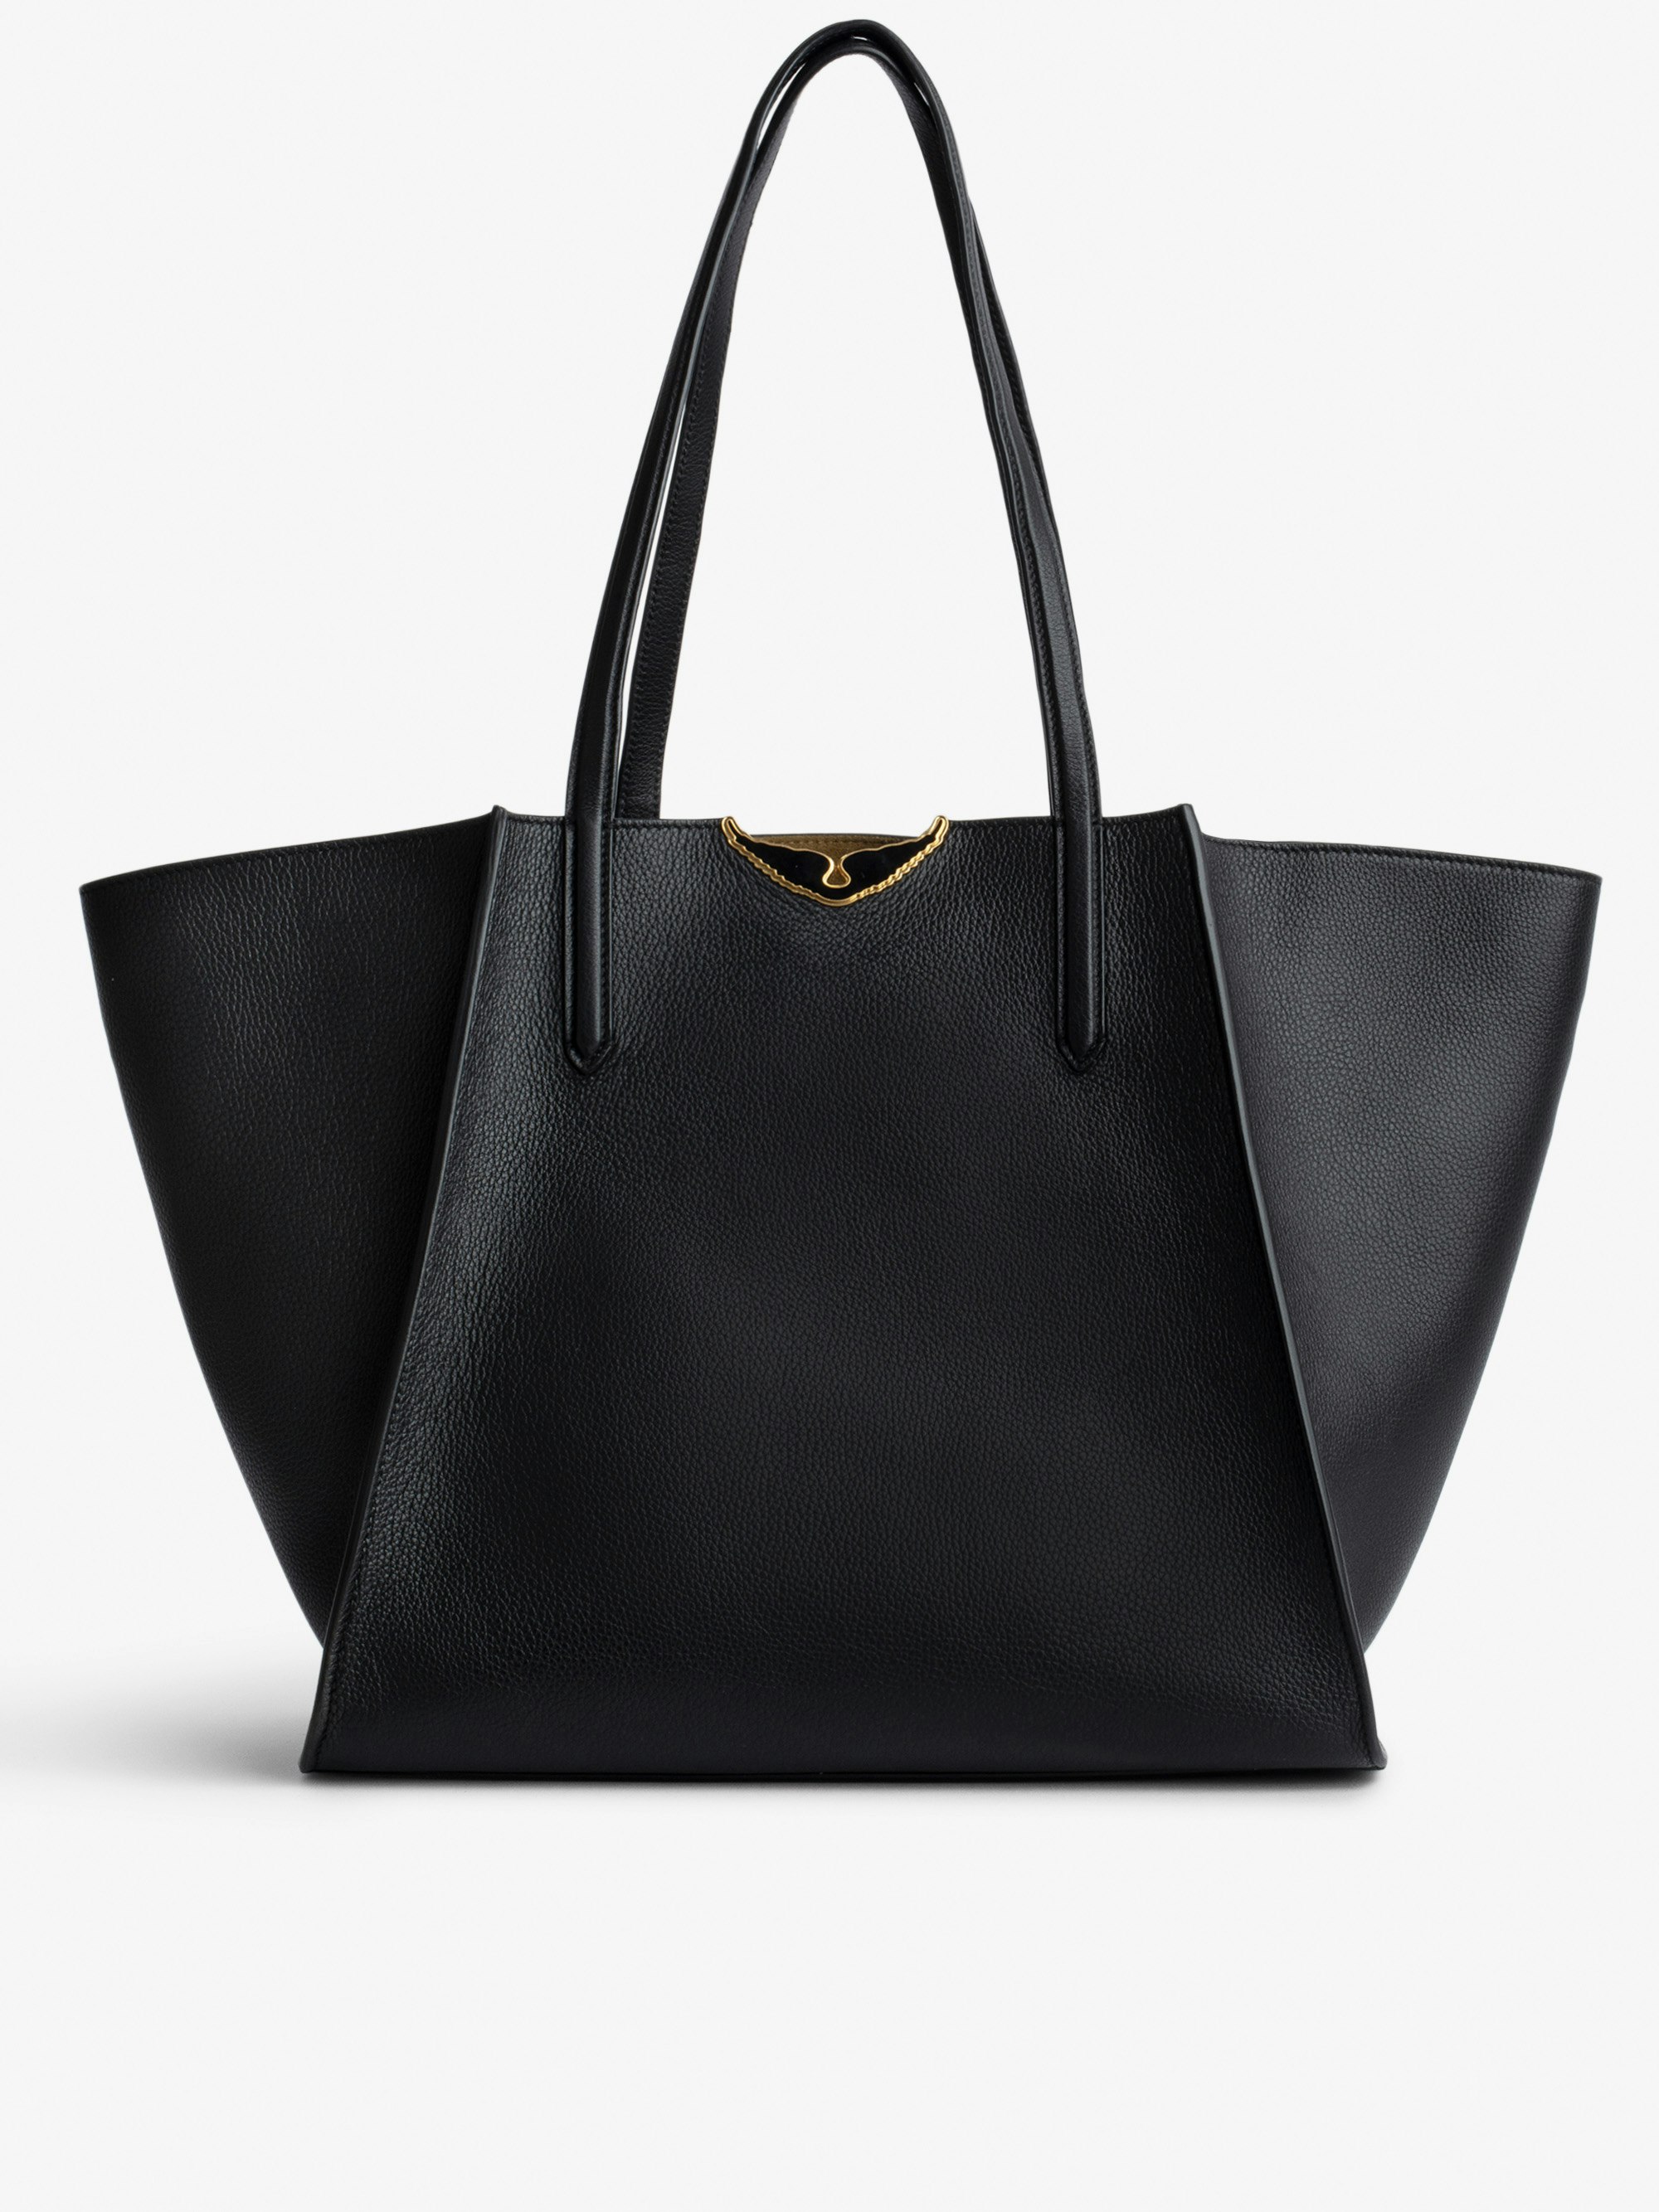 Le Borderline Bag - Women's tote bag in black grained leather and khaki suede with black lacquered wings.